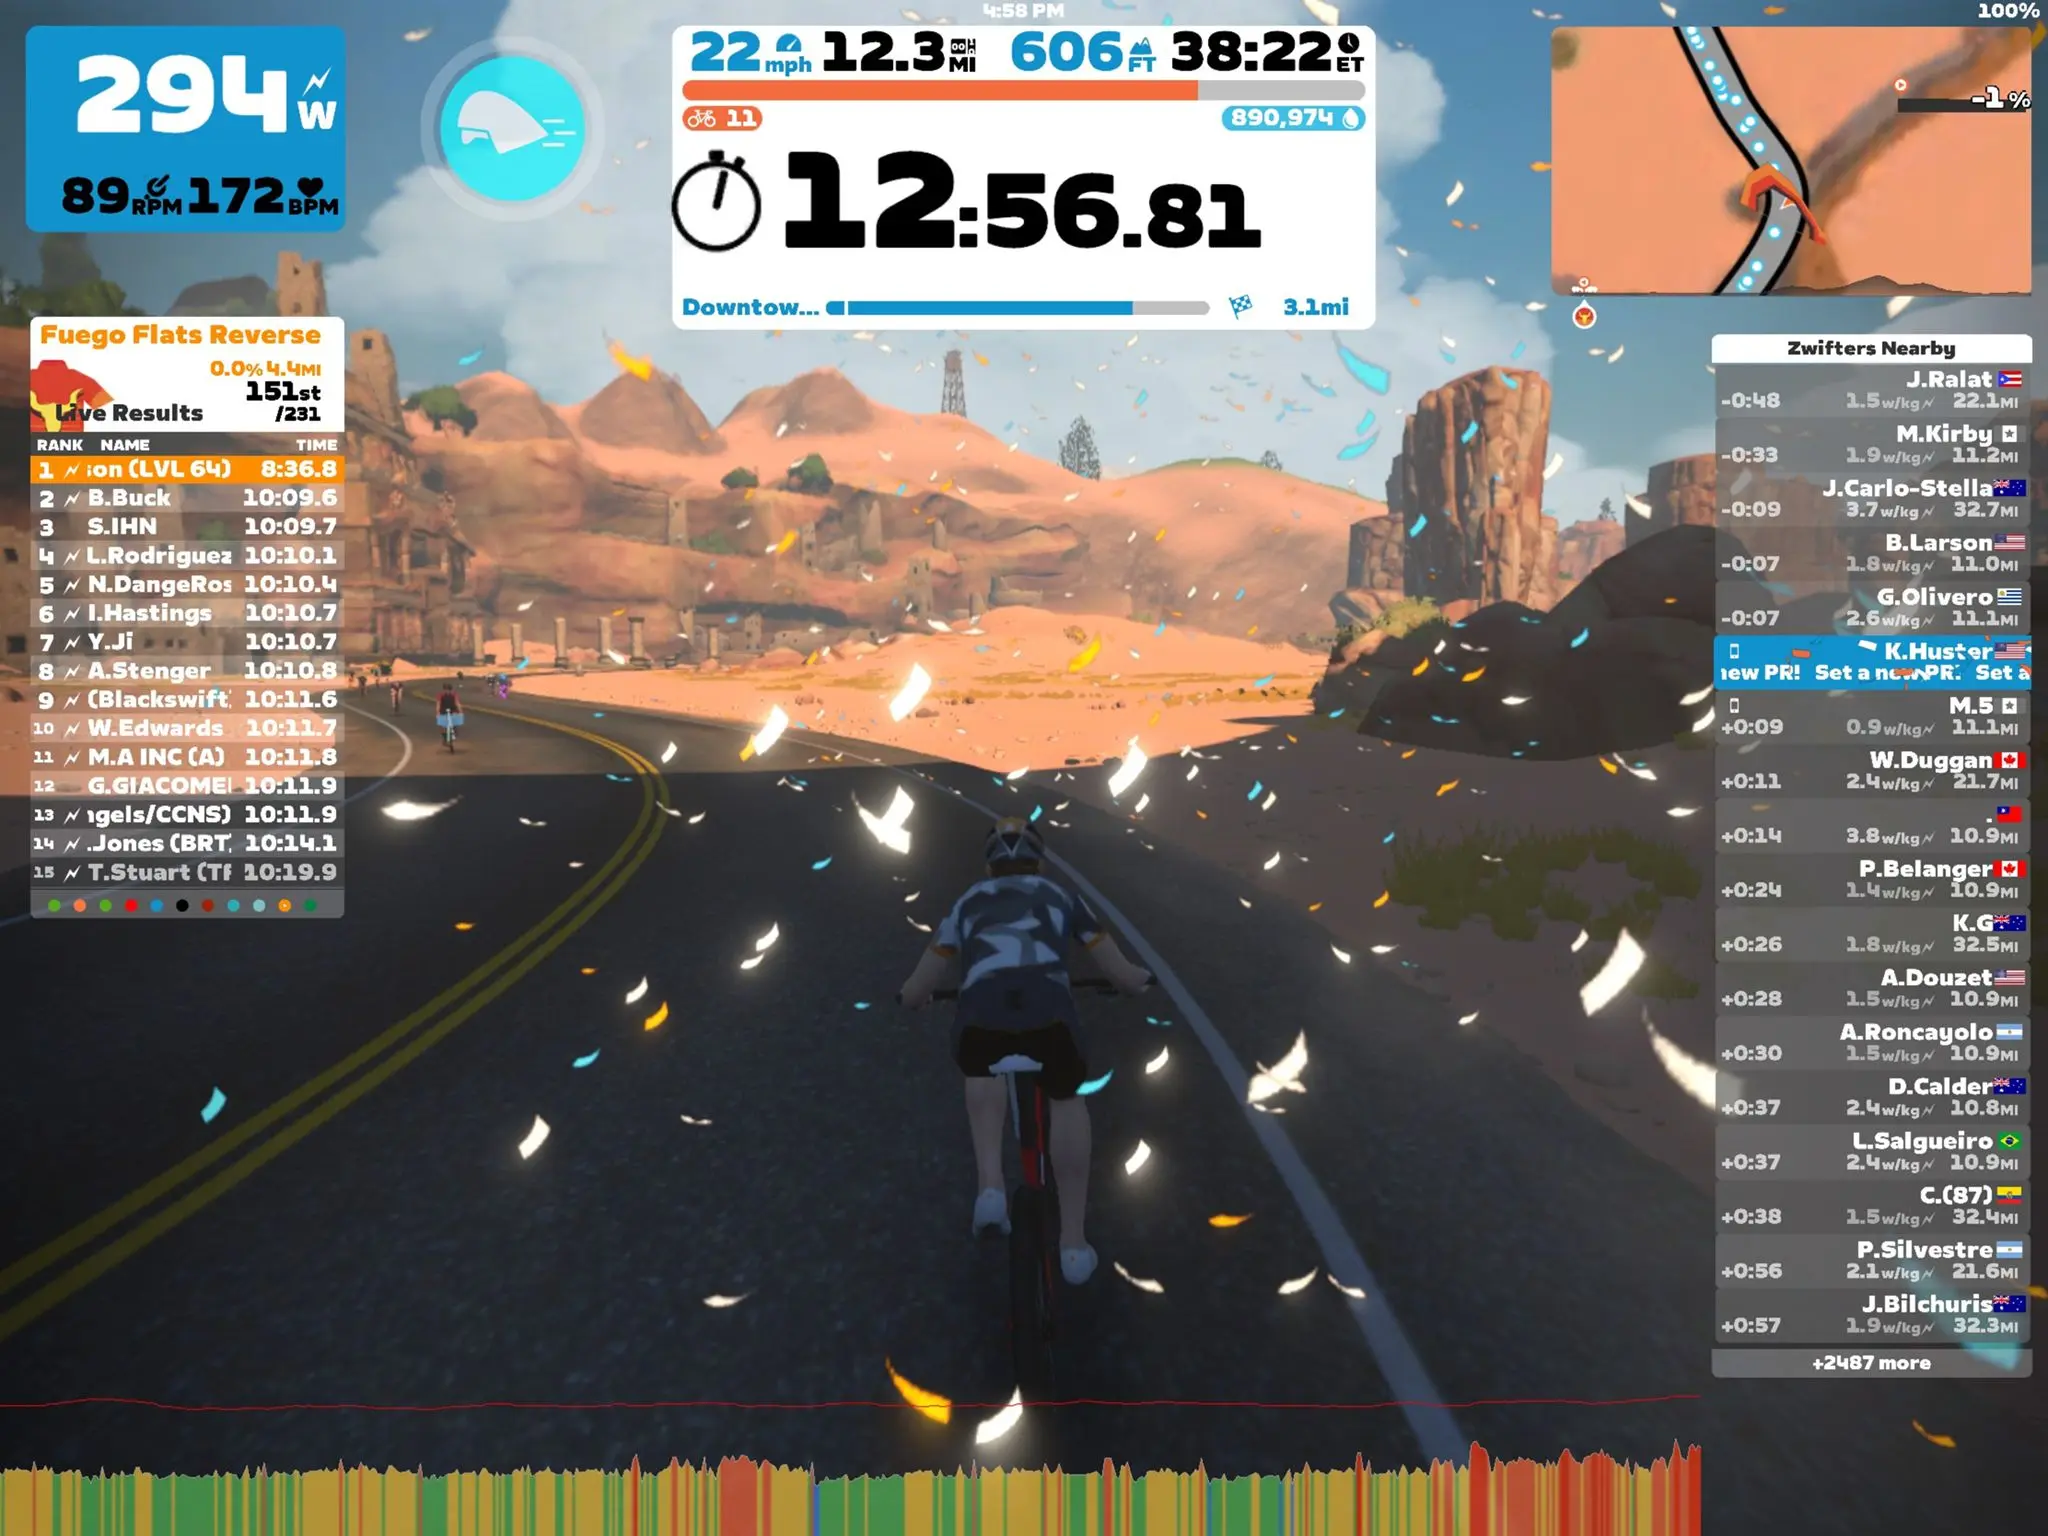 Keith has completed a Zwift challenge and confetti is flying across the screen.